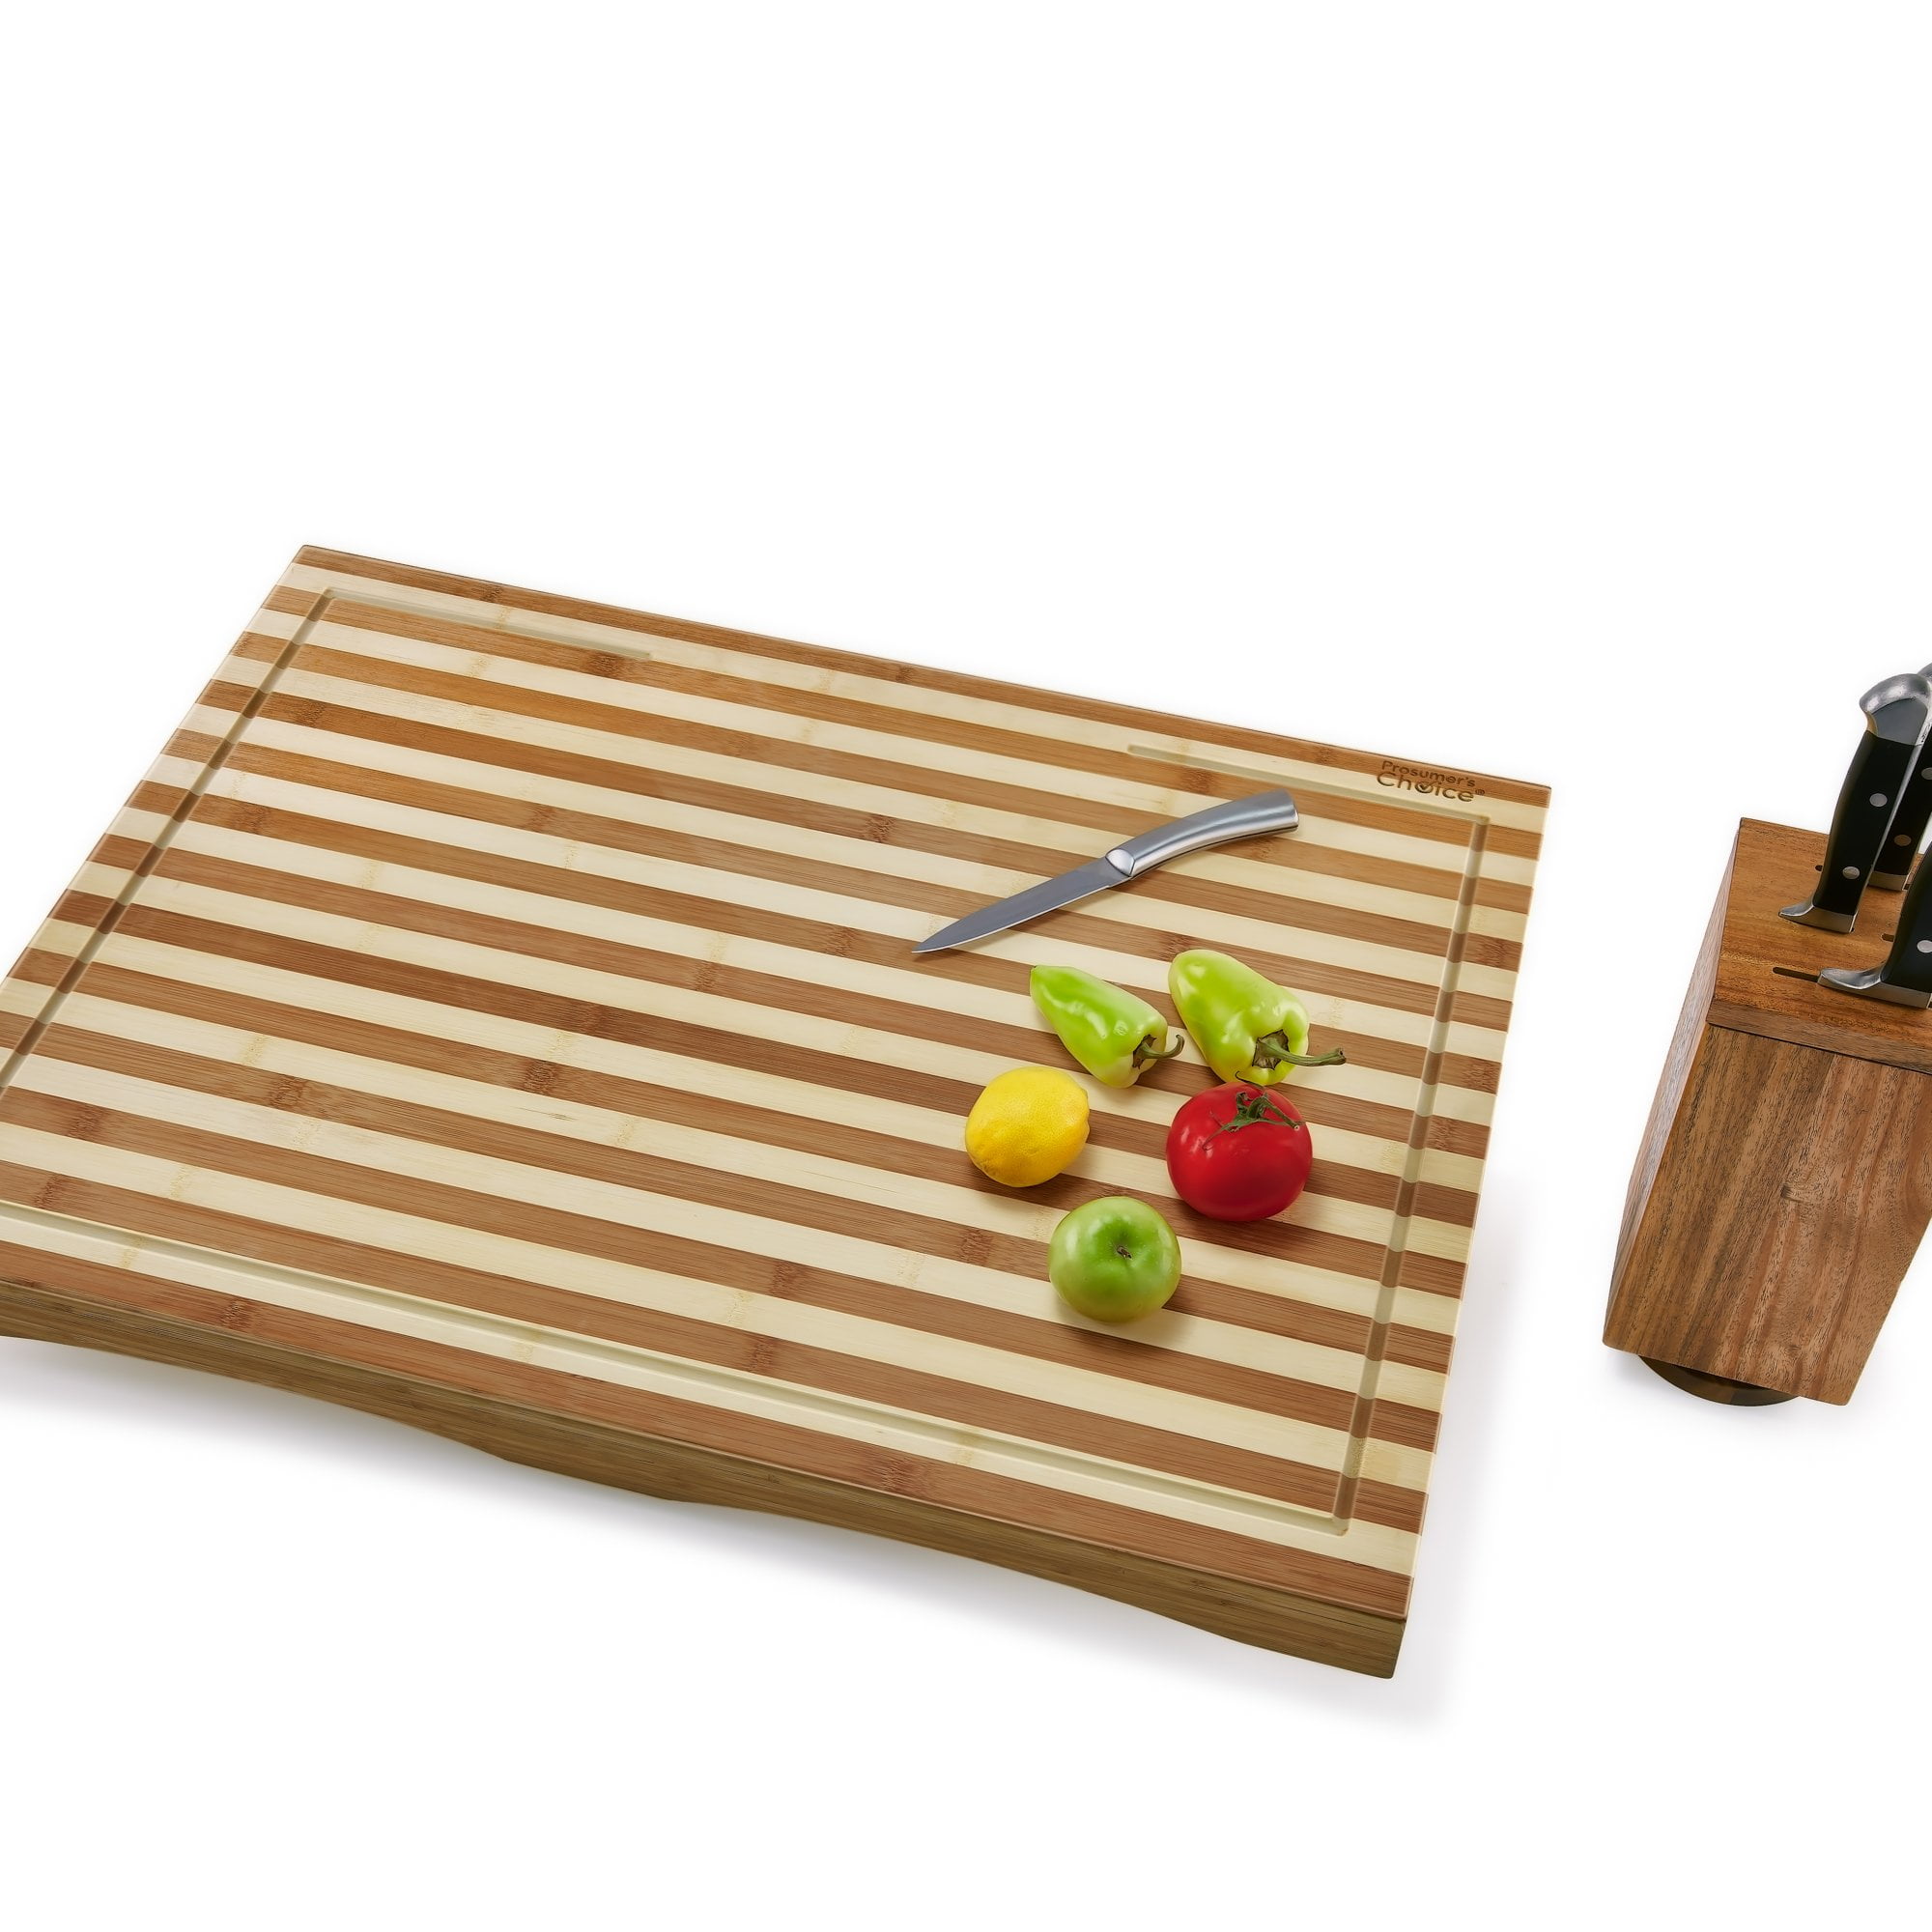 Prosumer's Choice Large Bamboo Stovetop Cover & Cutting Board w/ Handles &  Feet, 29.5 x 21.3 - Kroger